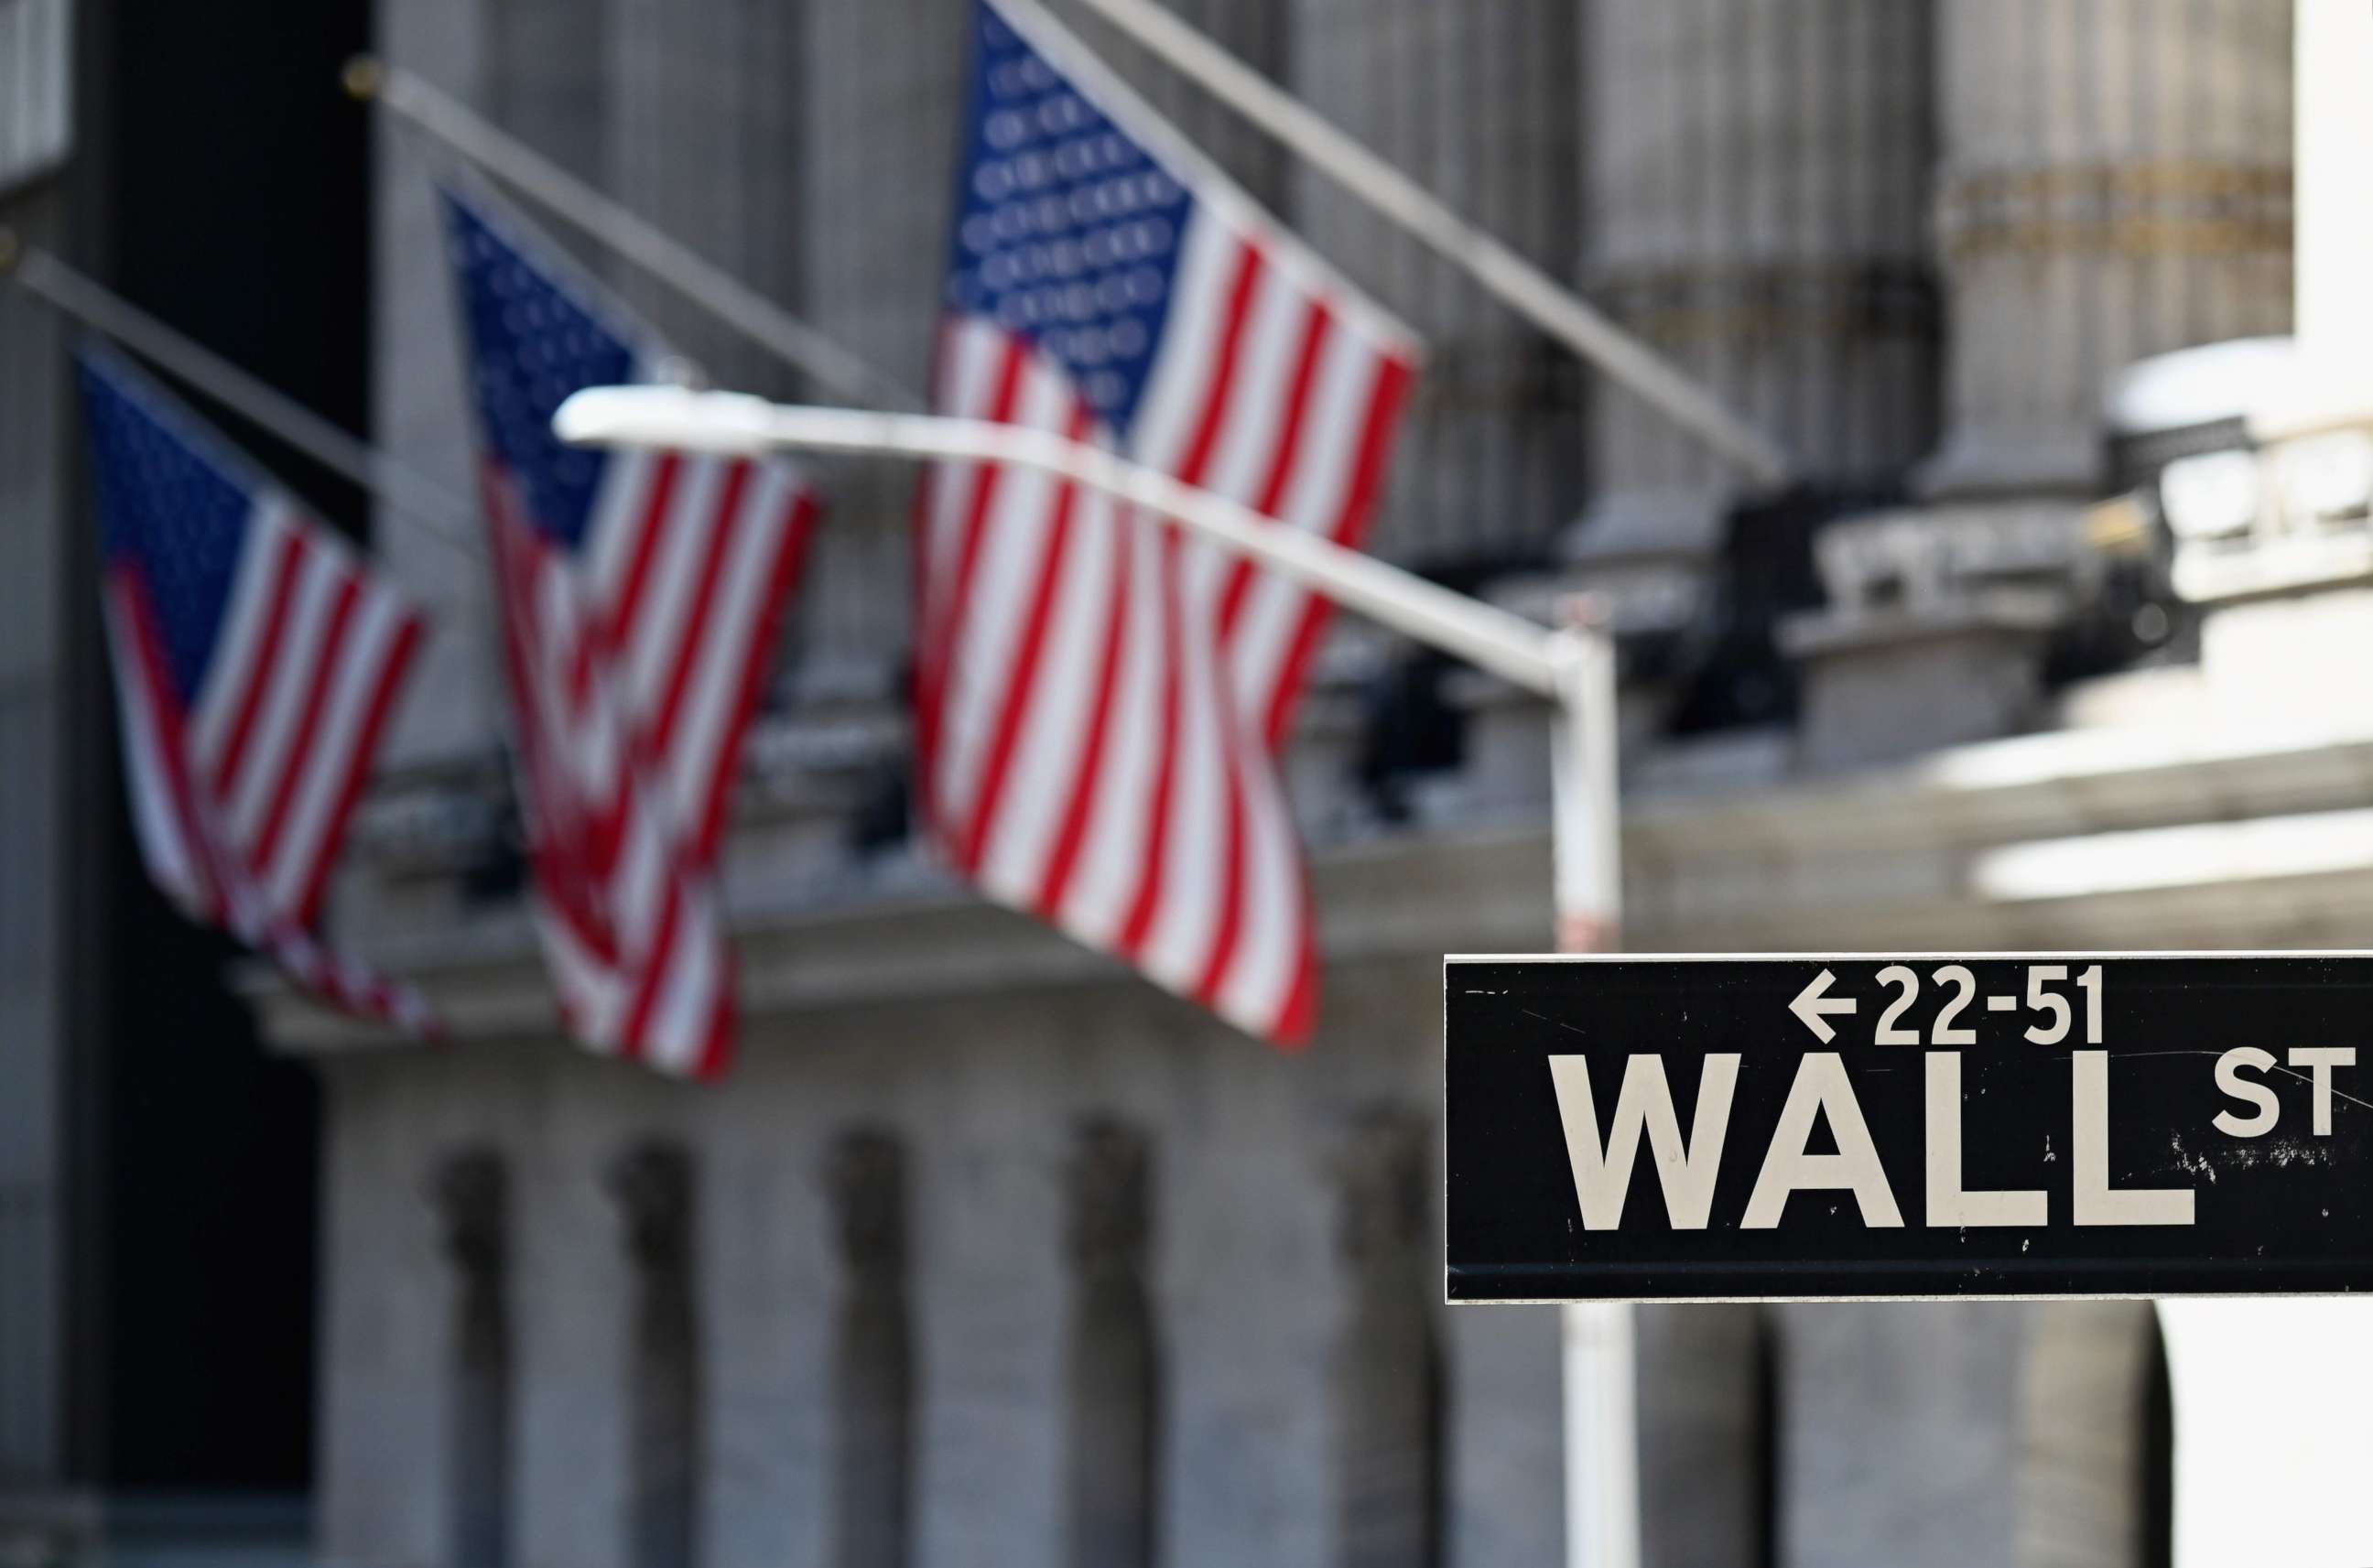 PHOTO: The New York Stock Exchange is pictured on Aug. 3, 2020 at Wall Street in New York City.